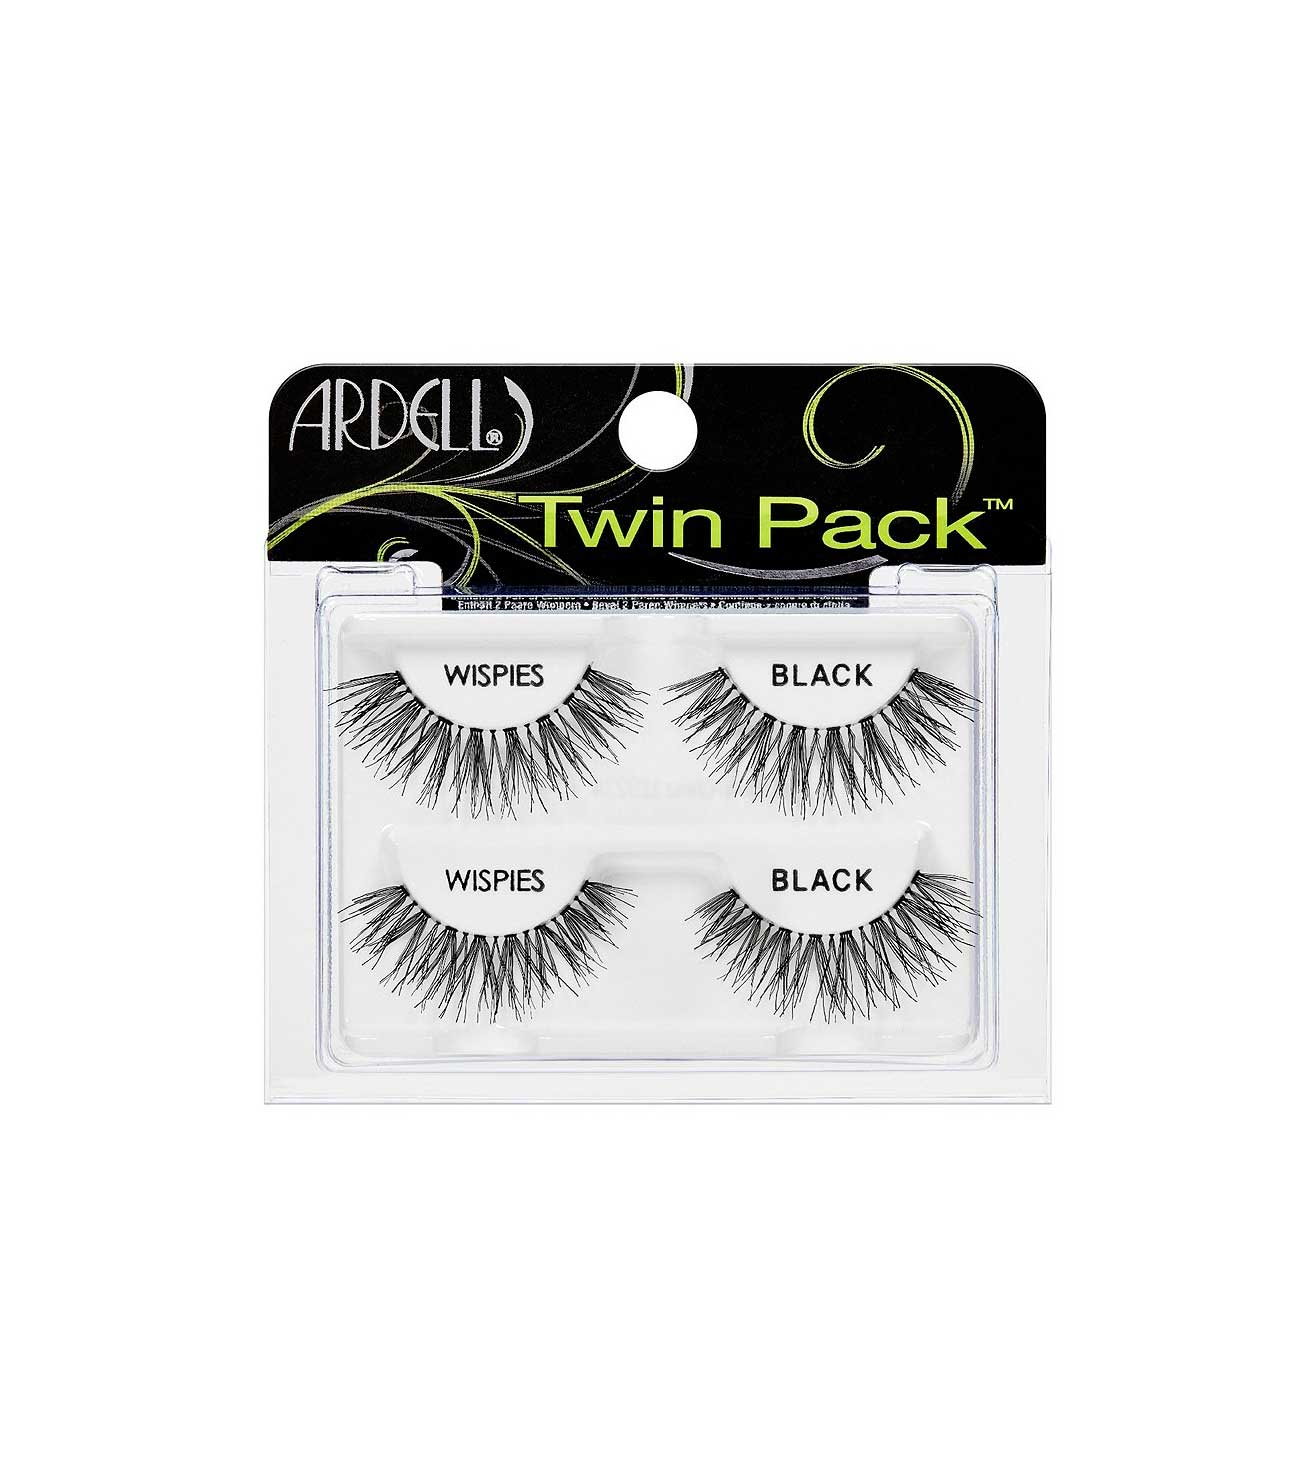 TWIN PACK WISPIES-61424